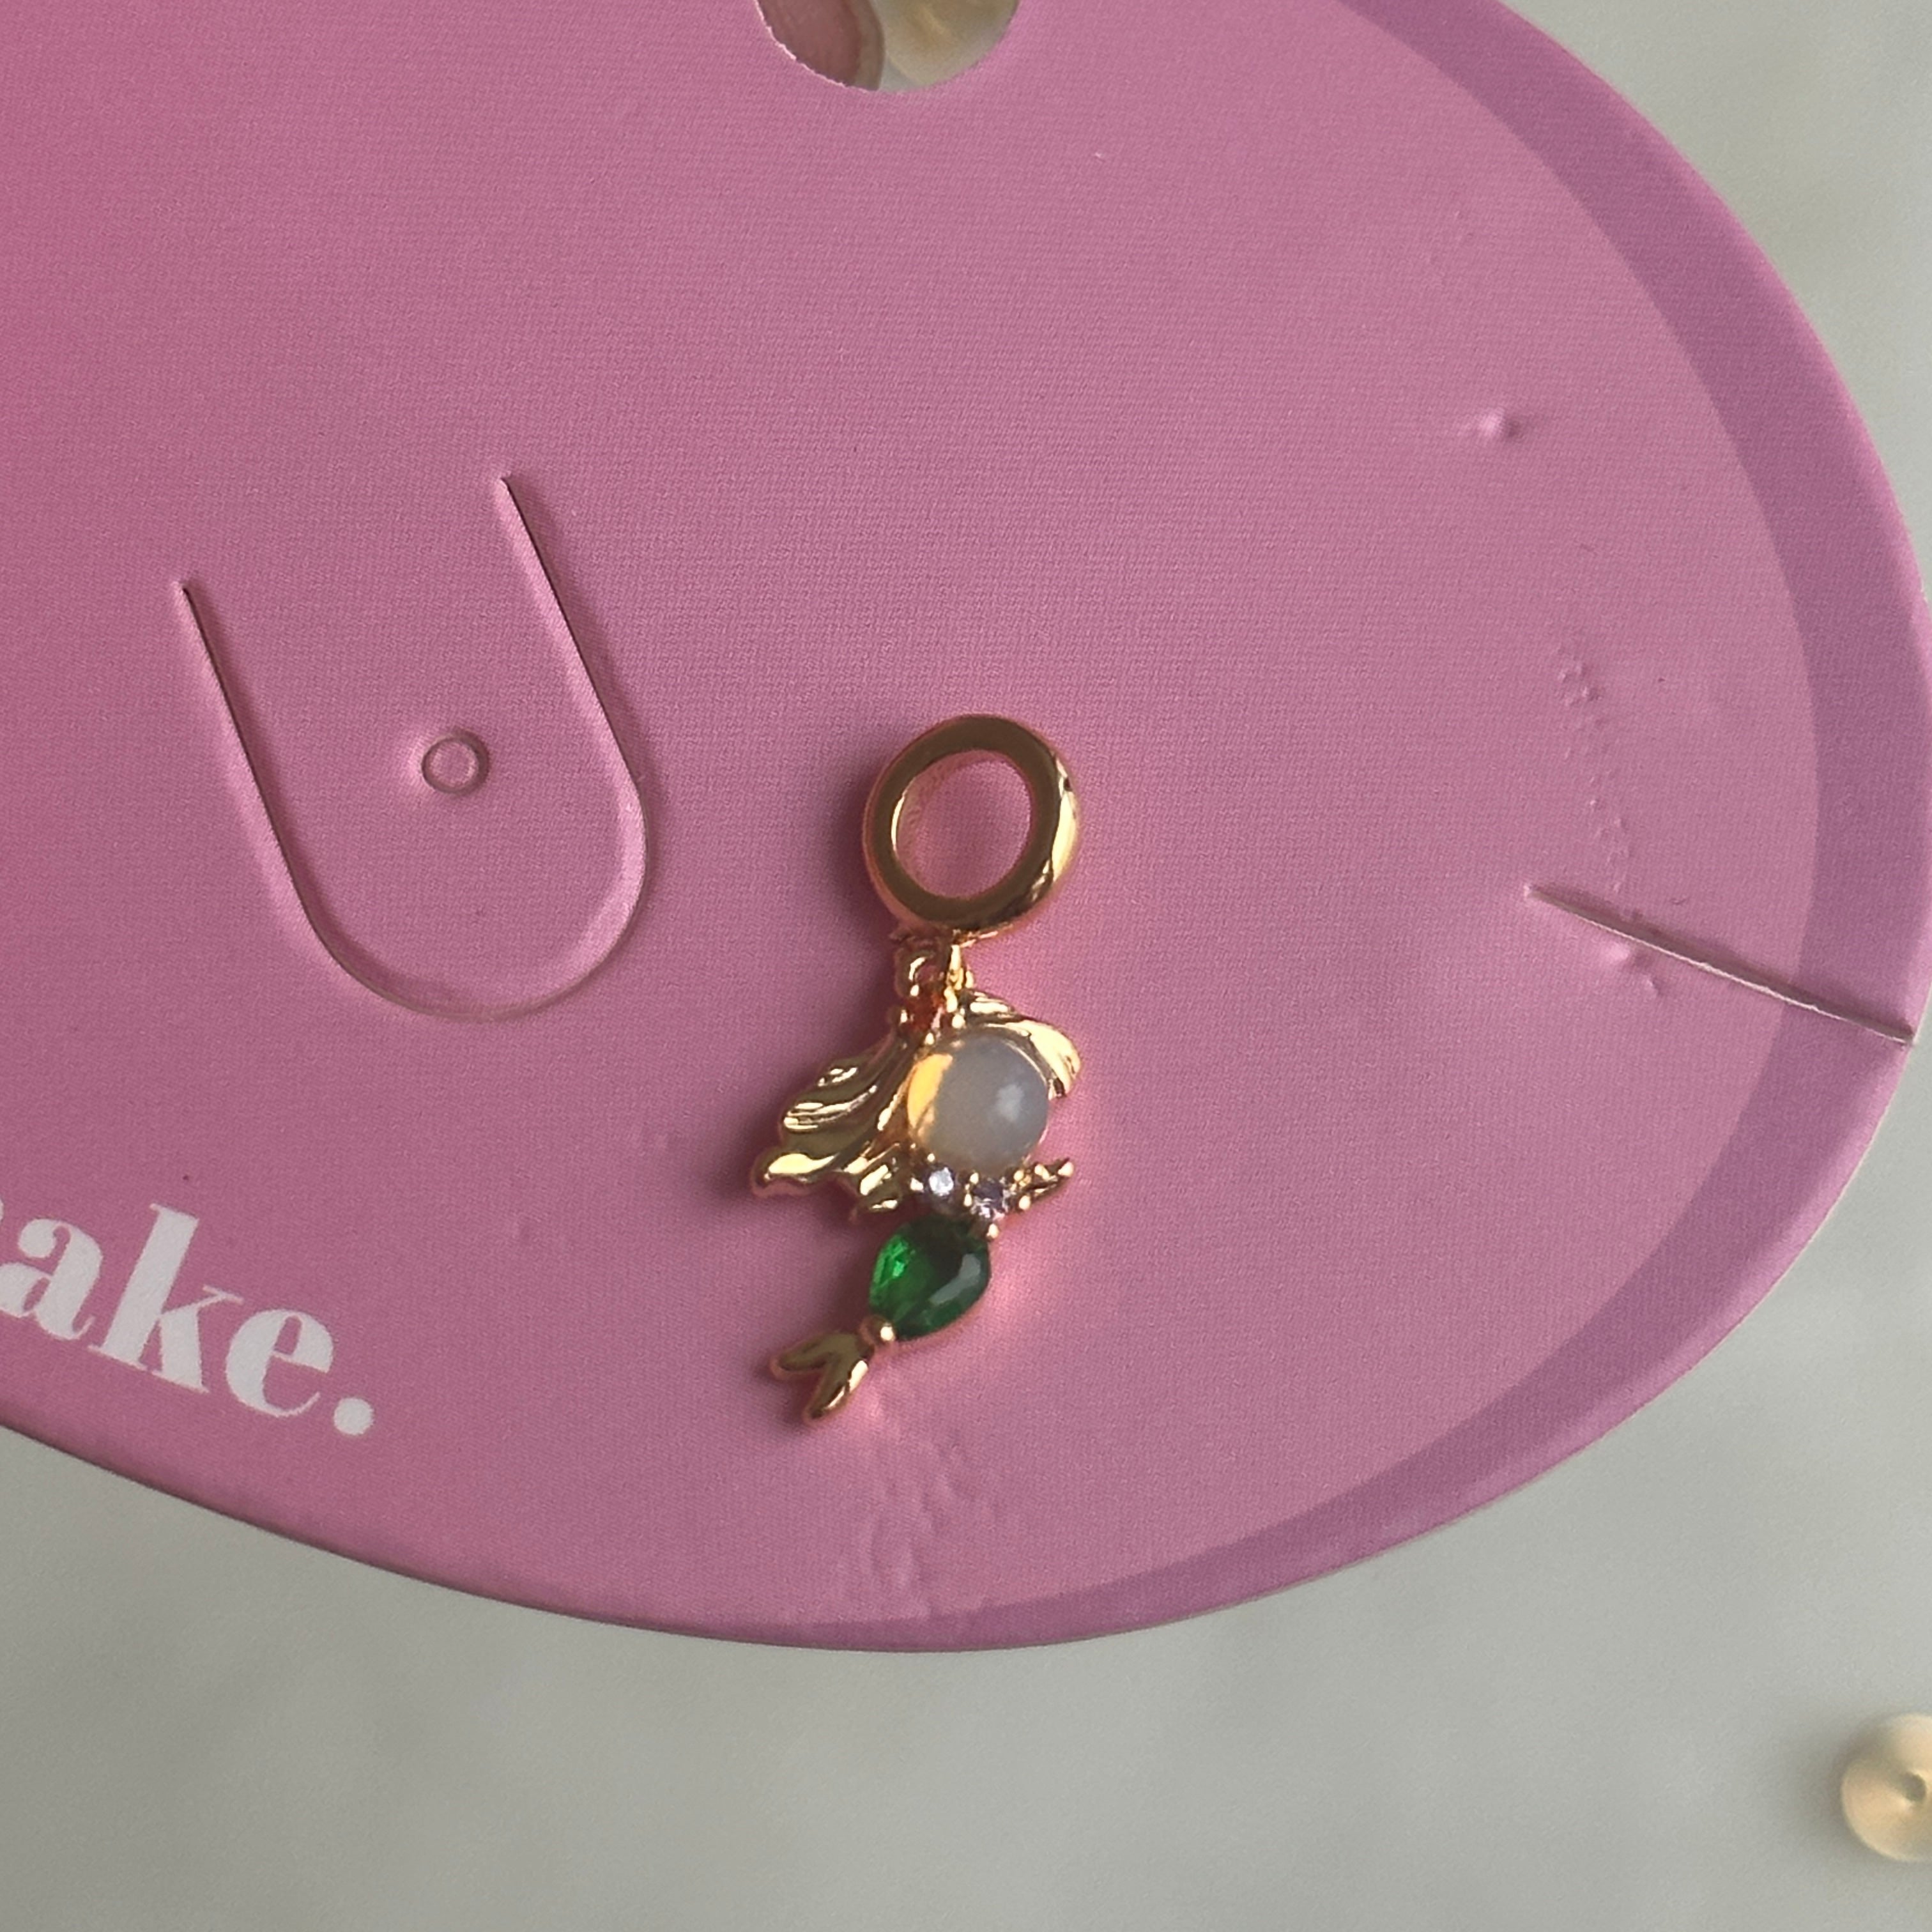 build your own charm necklace